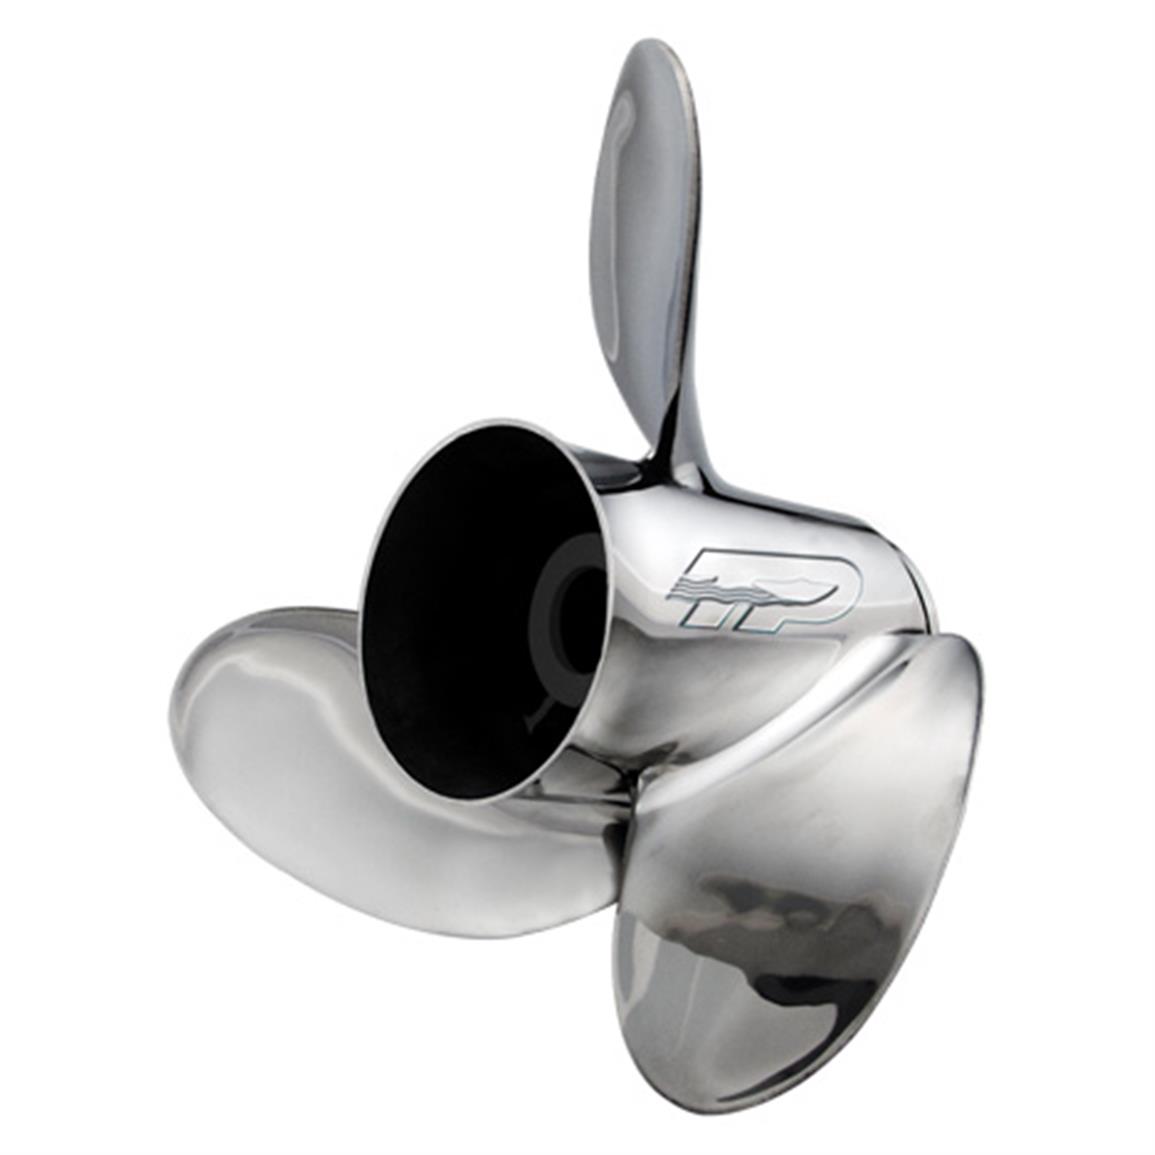 Turning Point Propellers® Express Stainless Steel Propeller, 16x19 3 Turning Point Stainless Steel Propeller